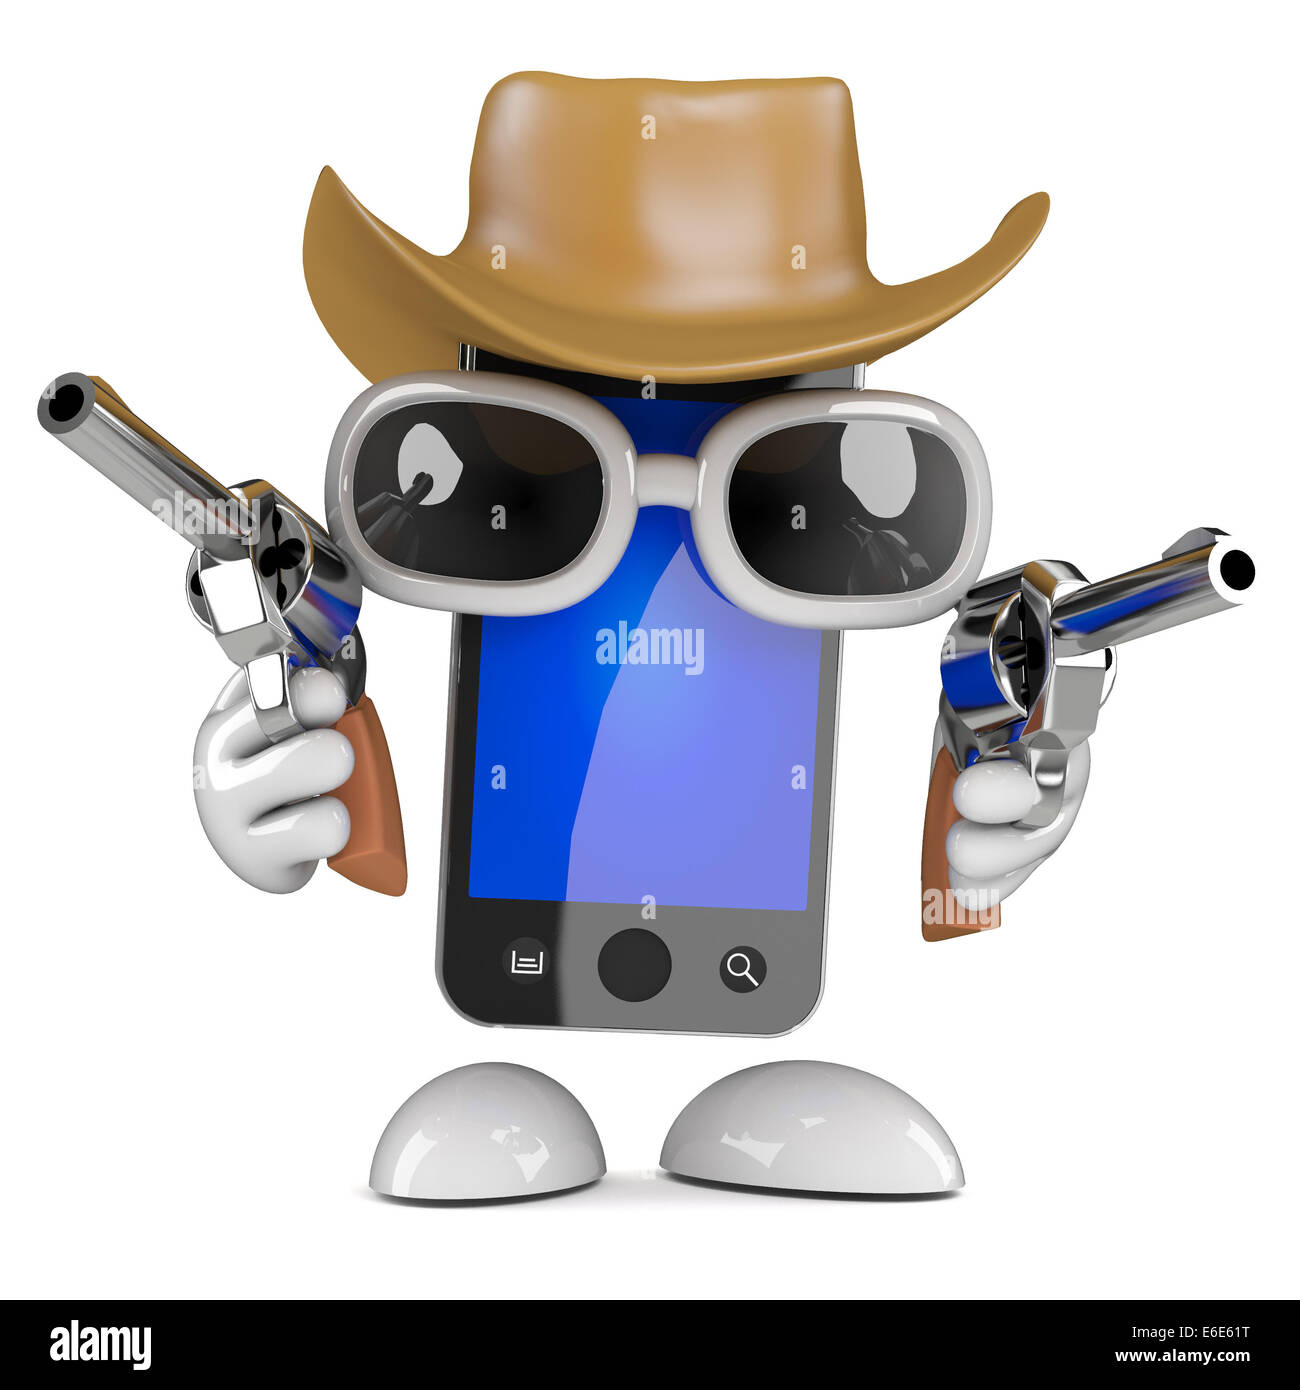 3d render of a smartphone wearing a cowboys hat and shooting pistols Stock Photo